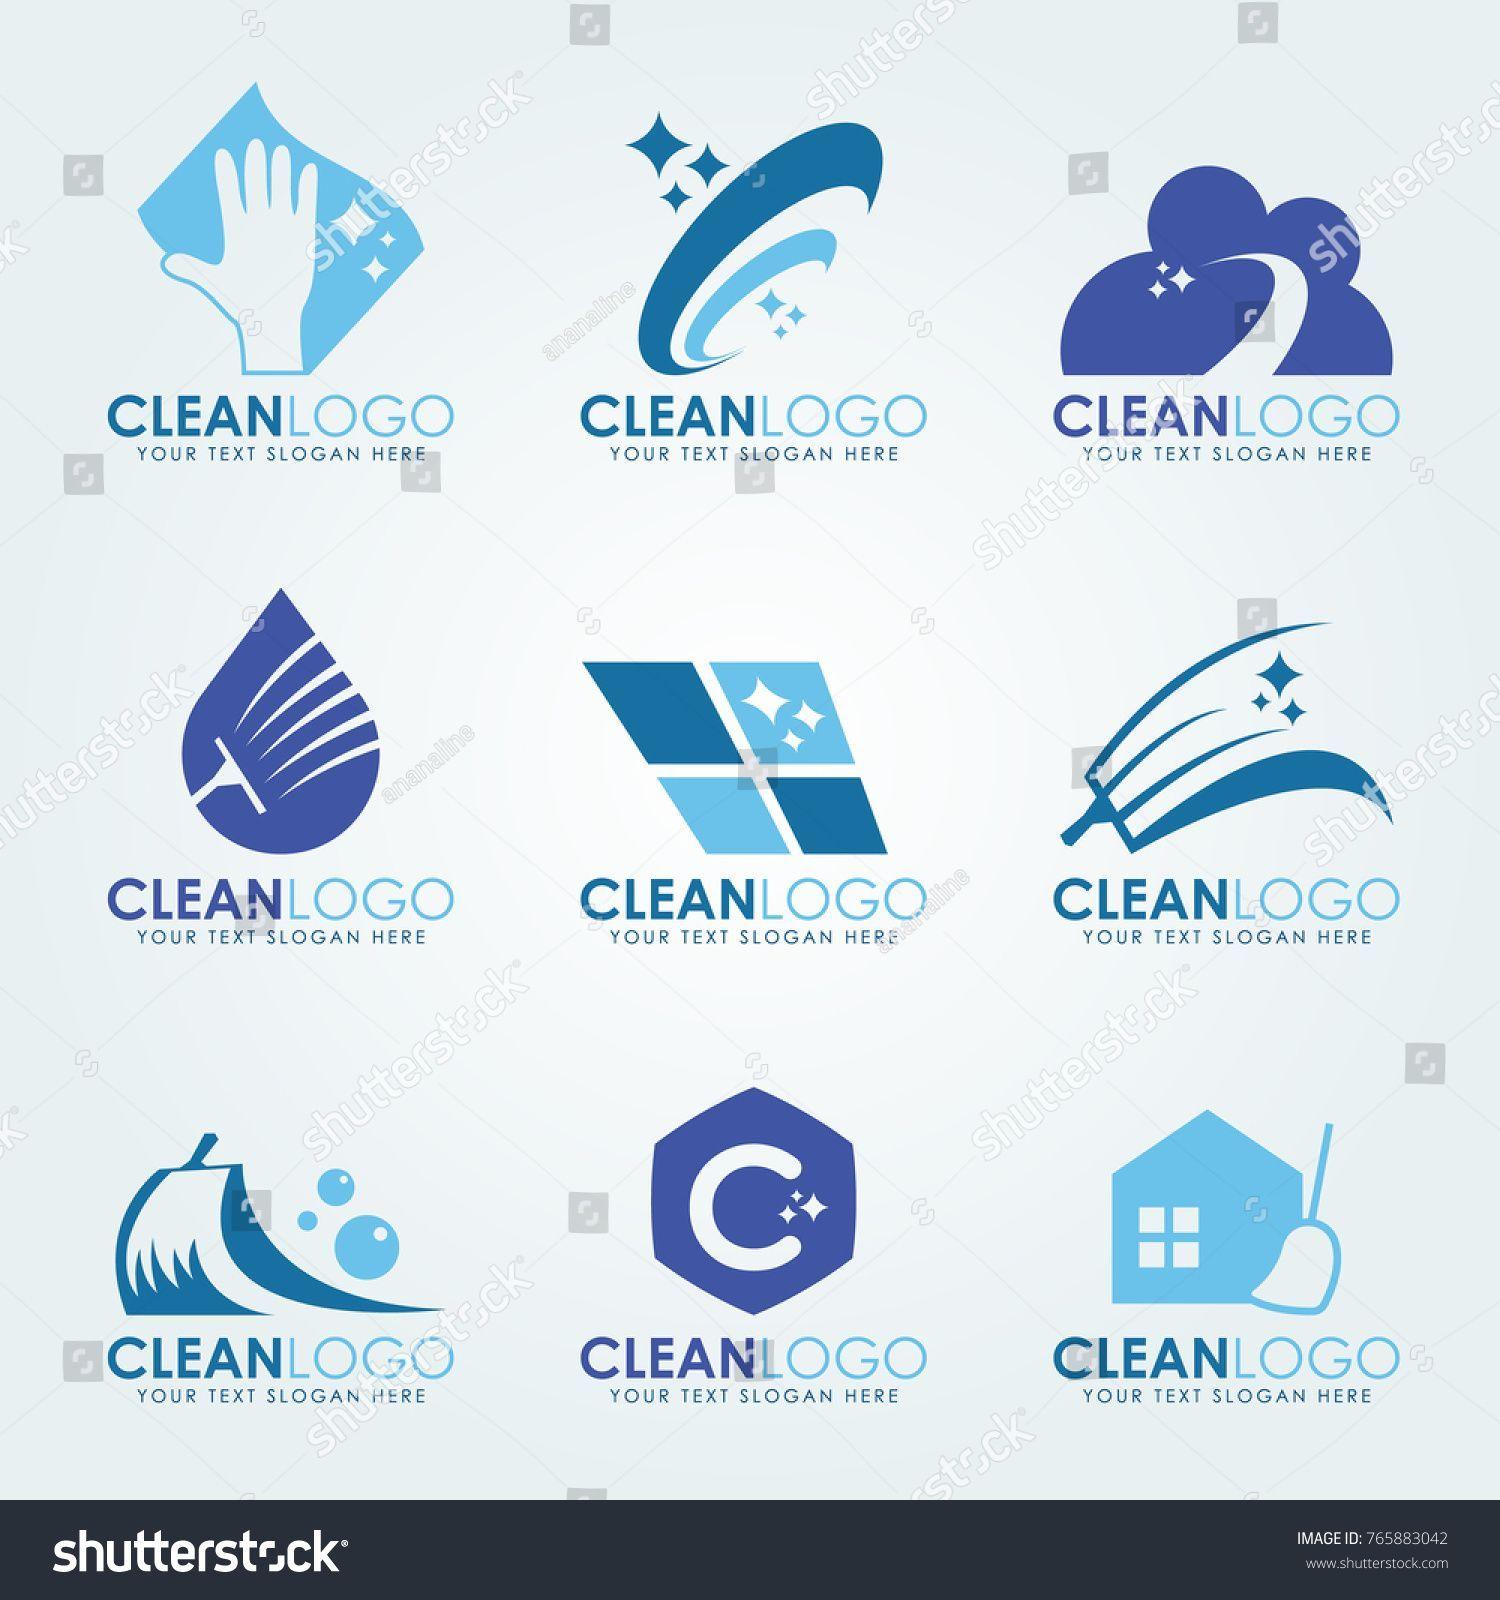 Broom Logo - Blue Clean logo with Cleaning gloves, water droplets , scrub brush ...